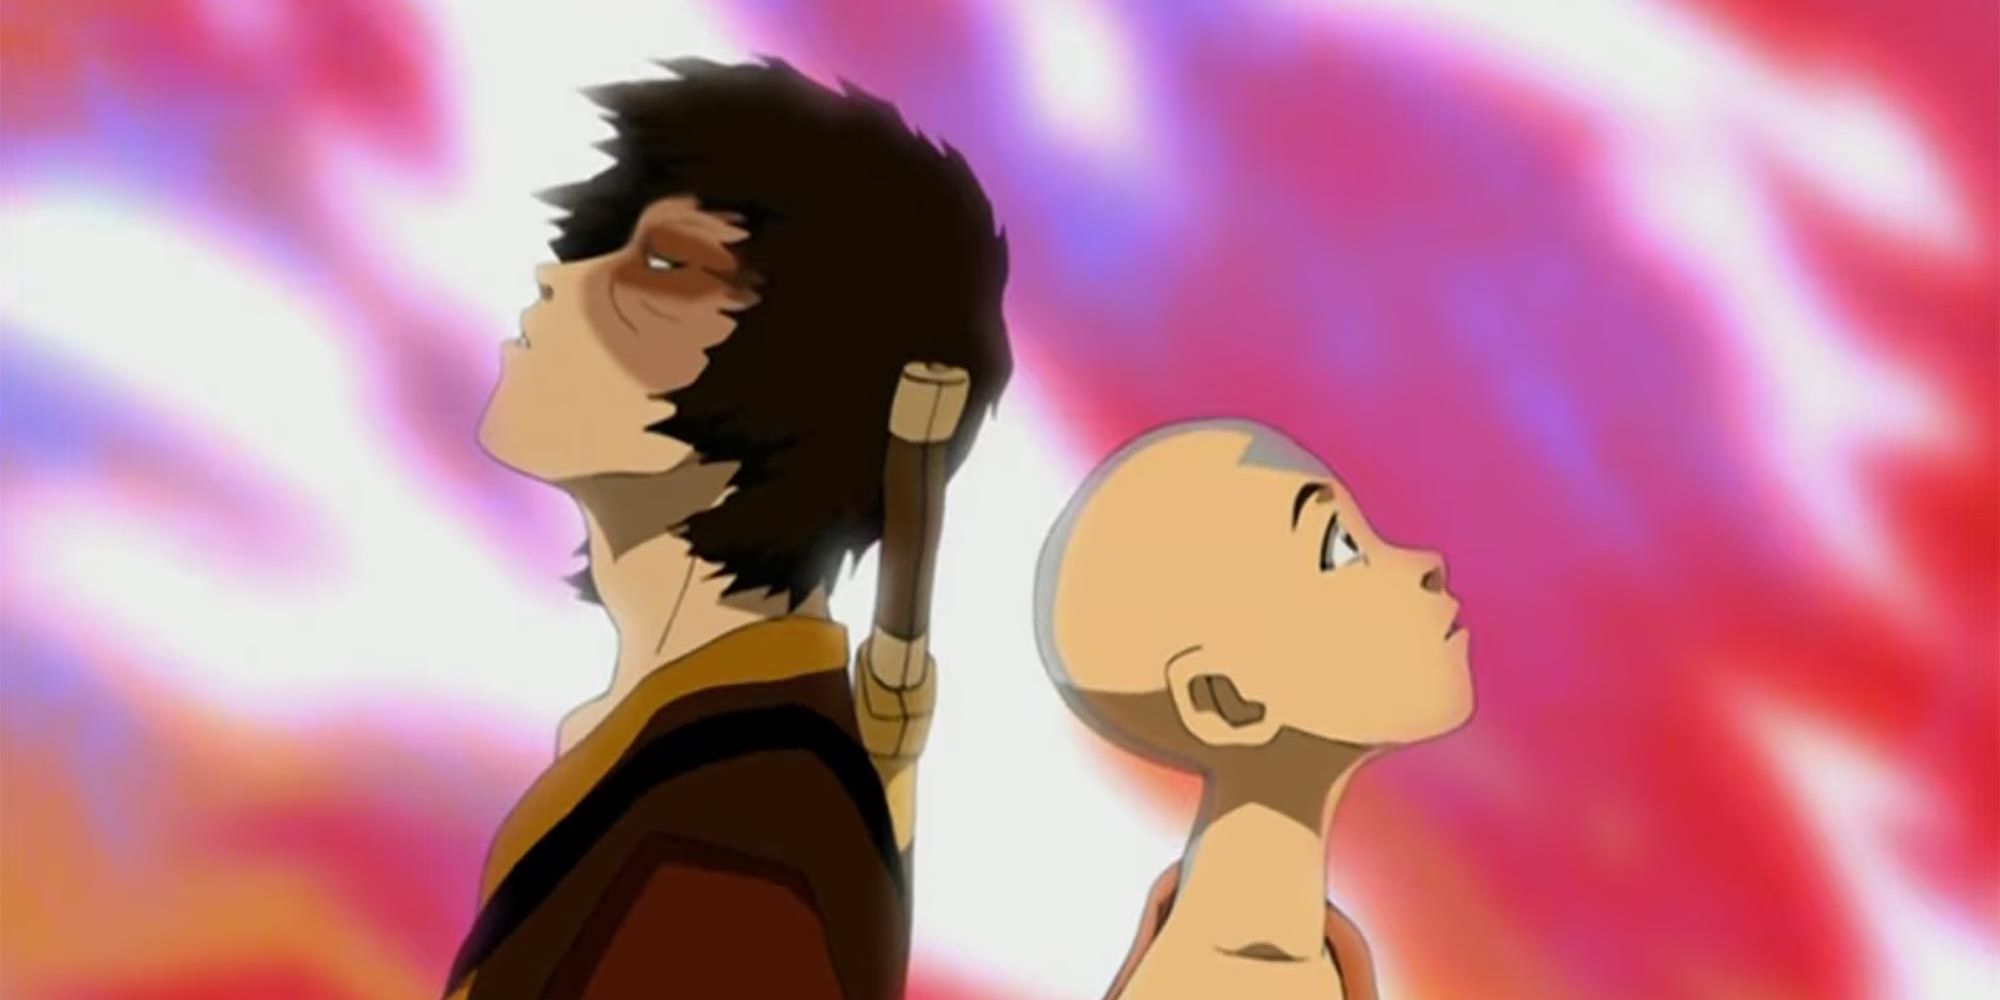 Aang and Zuko in Avatar the Last Airbender